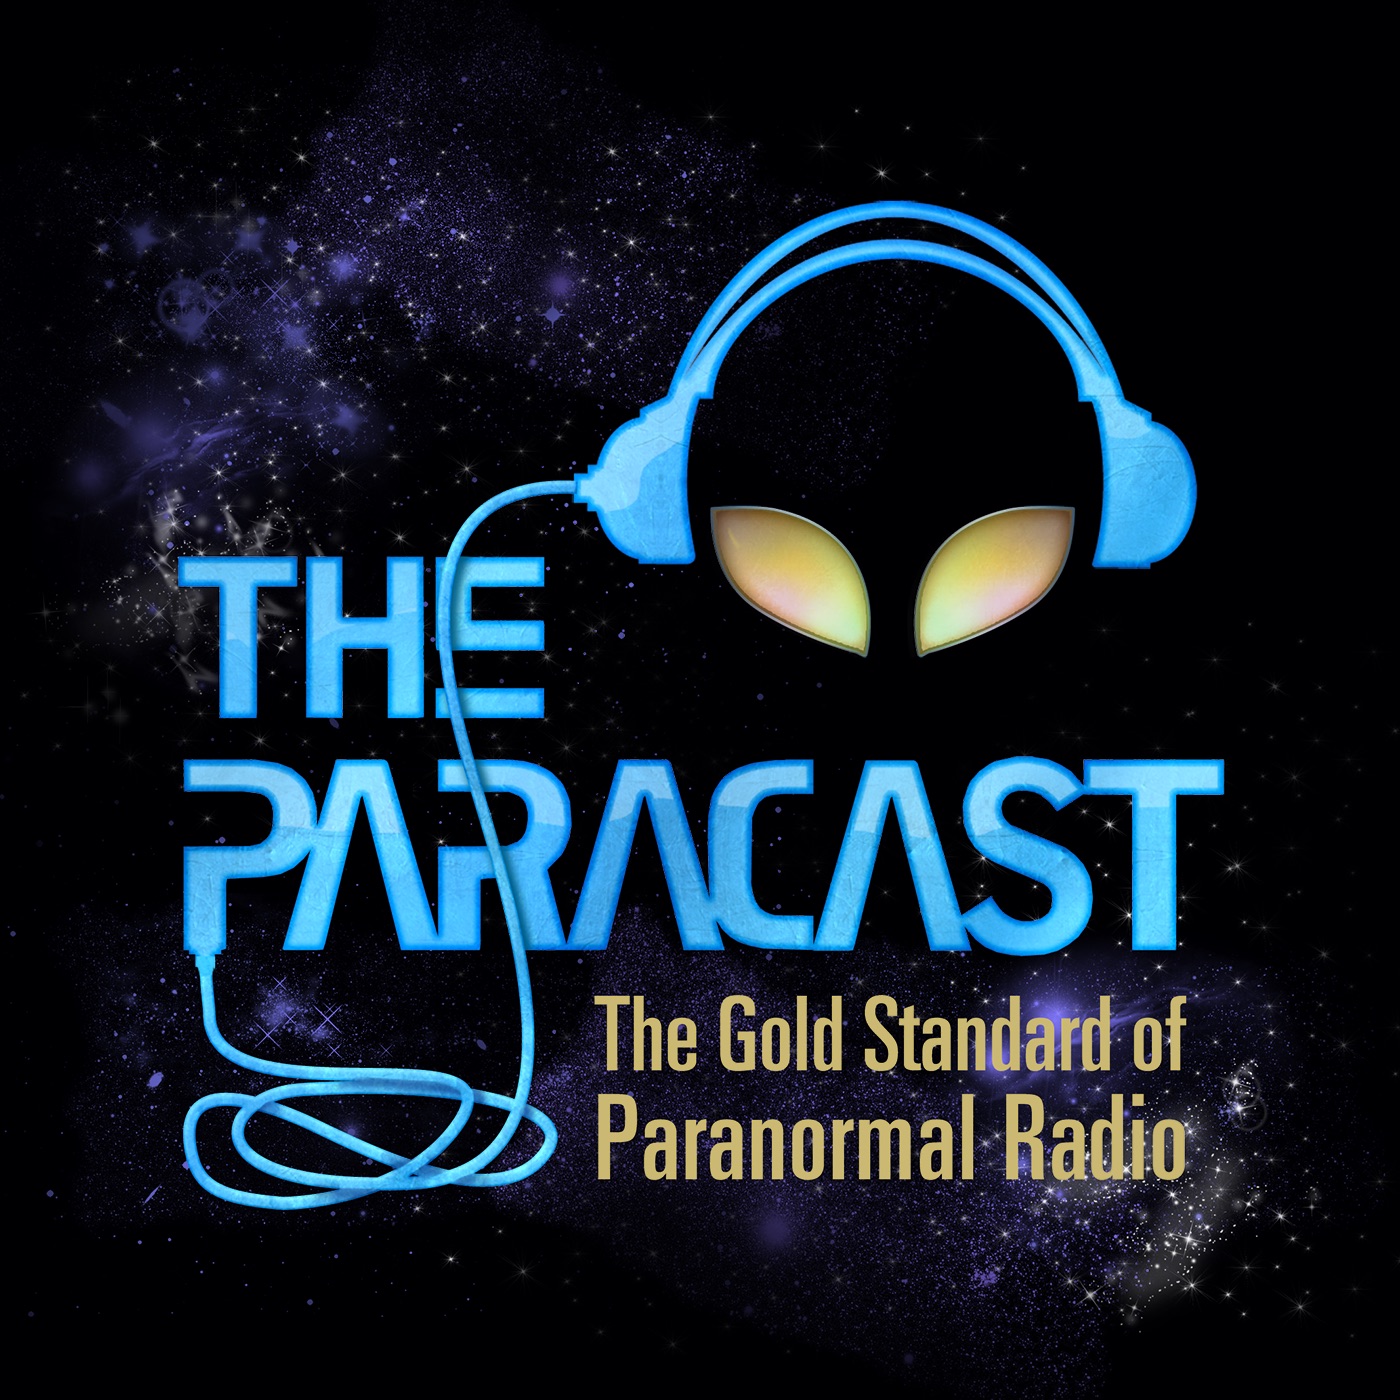 The Paracast -- The Gold Standard of Paranormal Radio Podcast artwork